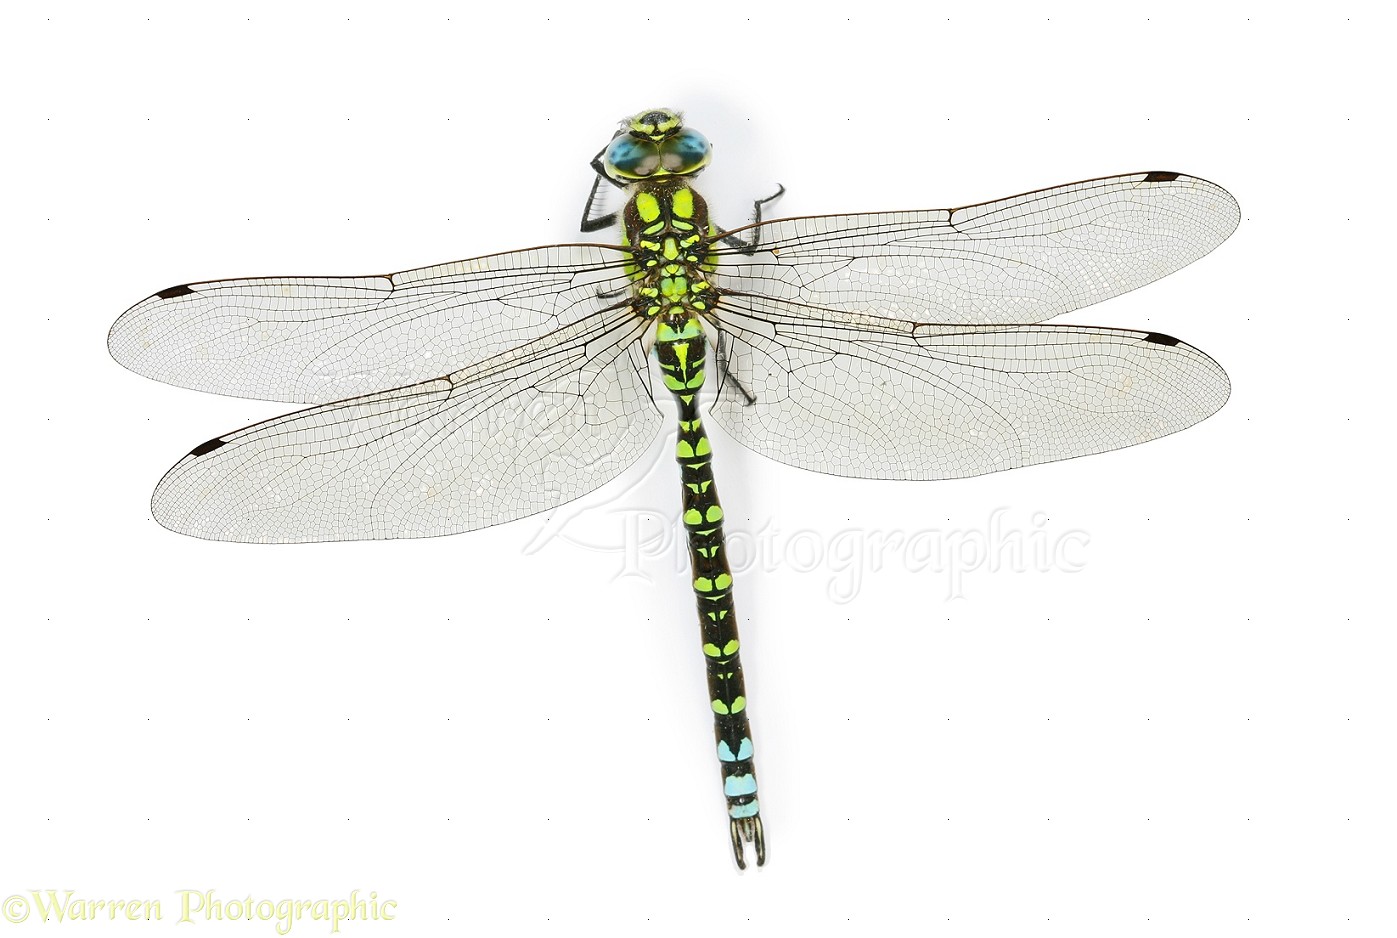 Southern Hawker Dragonfly photo - WP10484